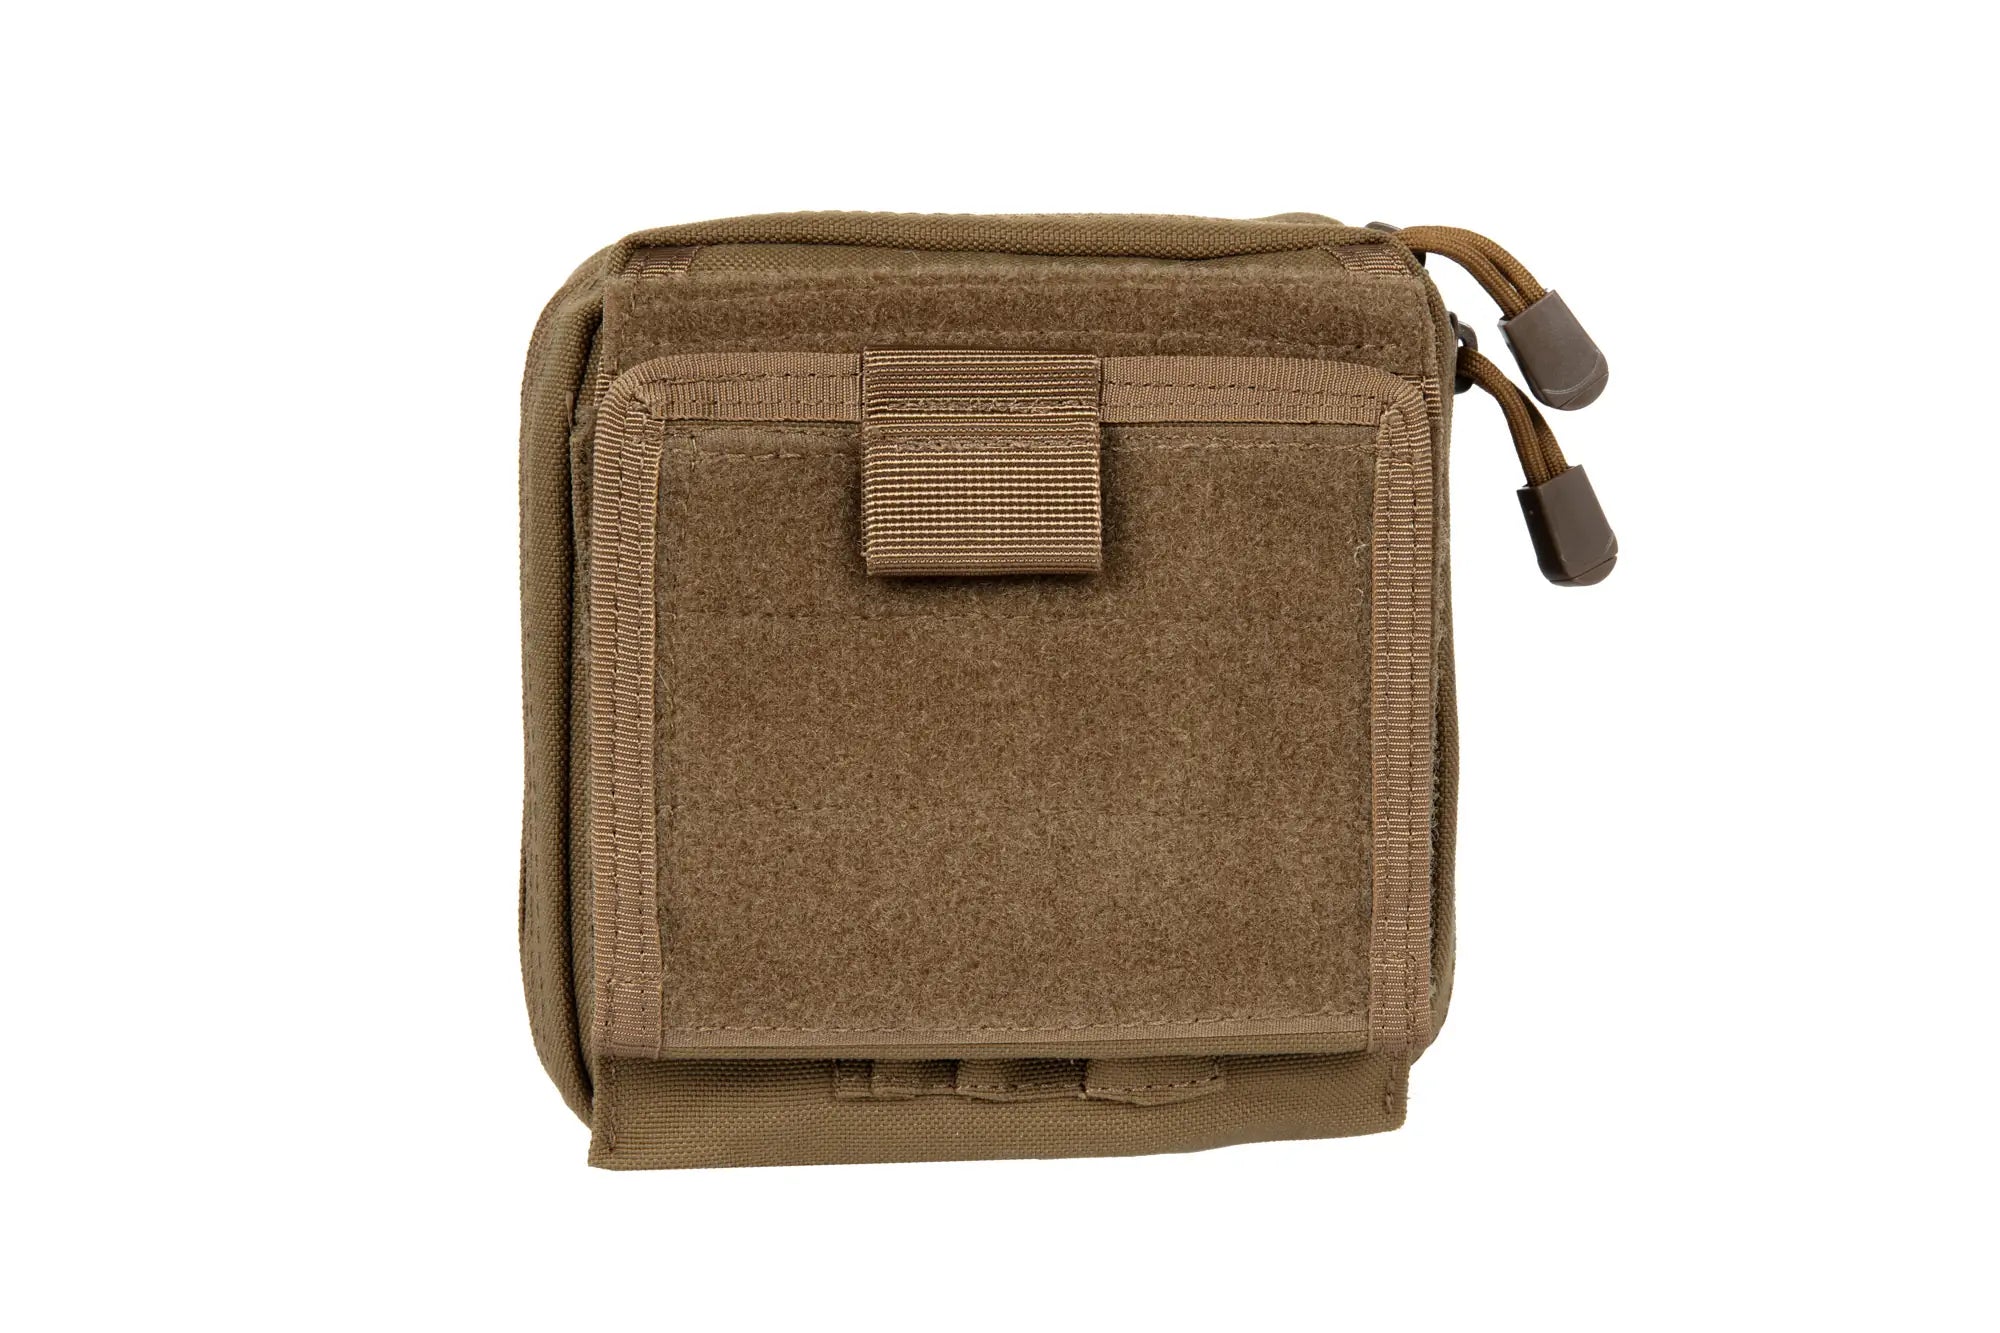 Administrative Panel with Map Pouch - Tan-1